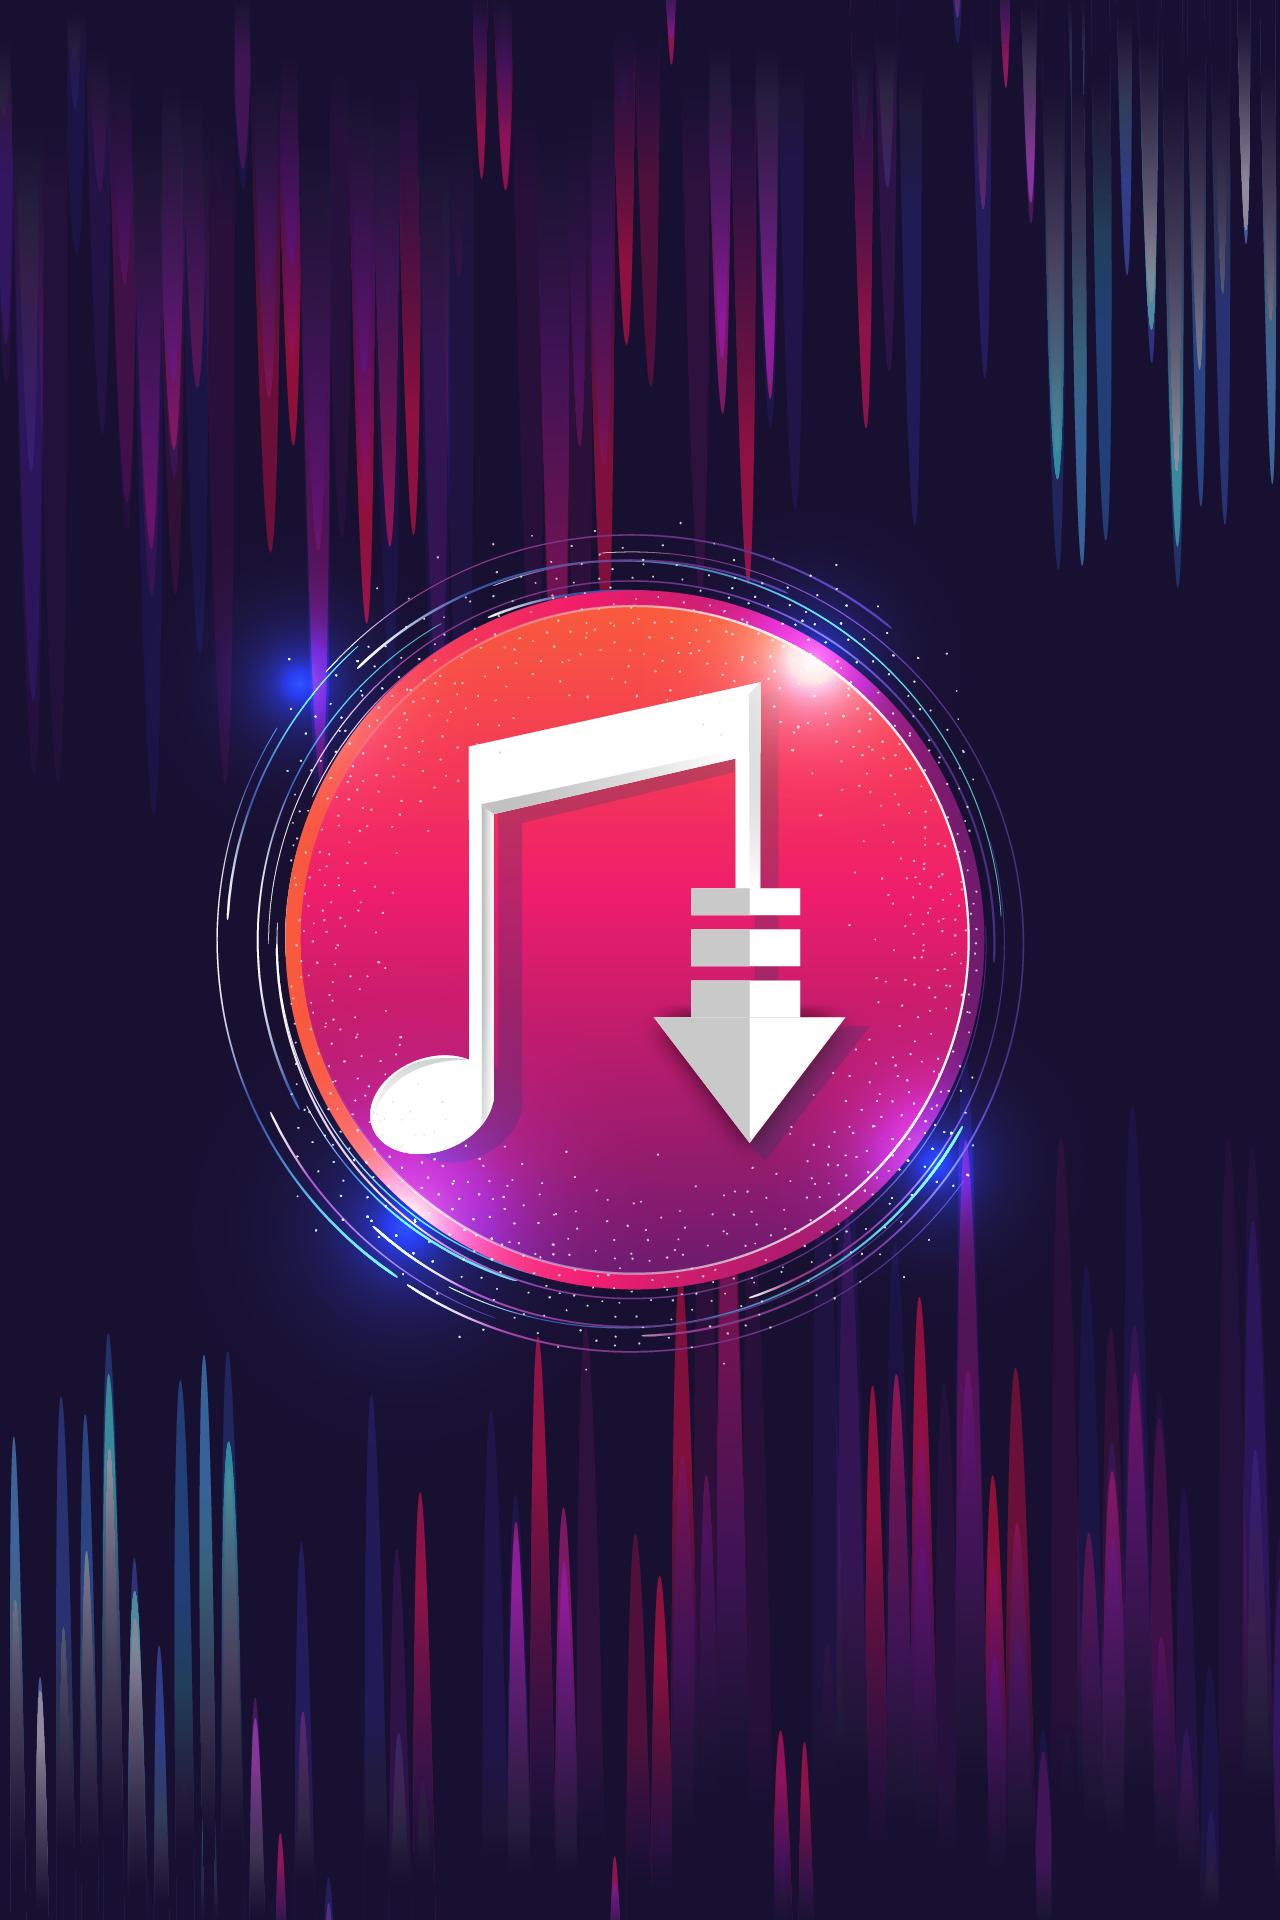 Free MP3 Music Download & MP3 Music Donwload 2019 for Android - APK Download